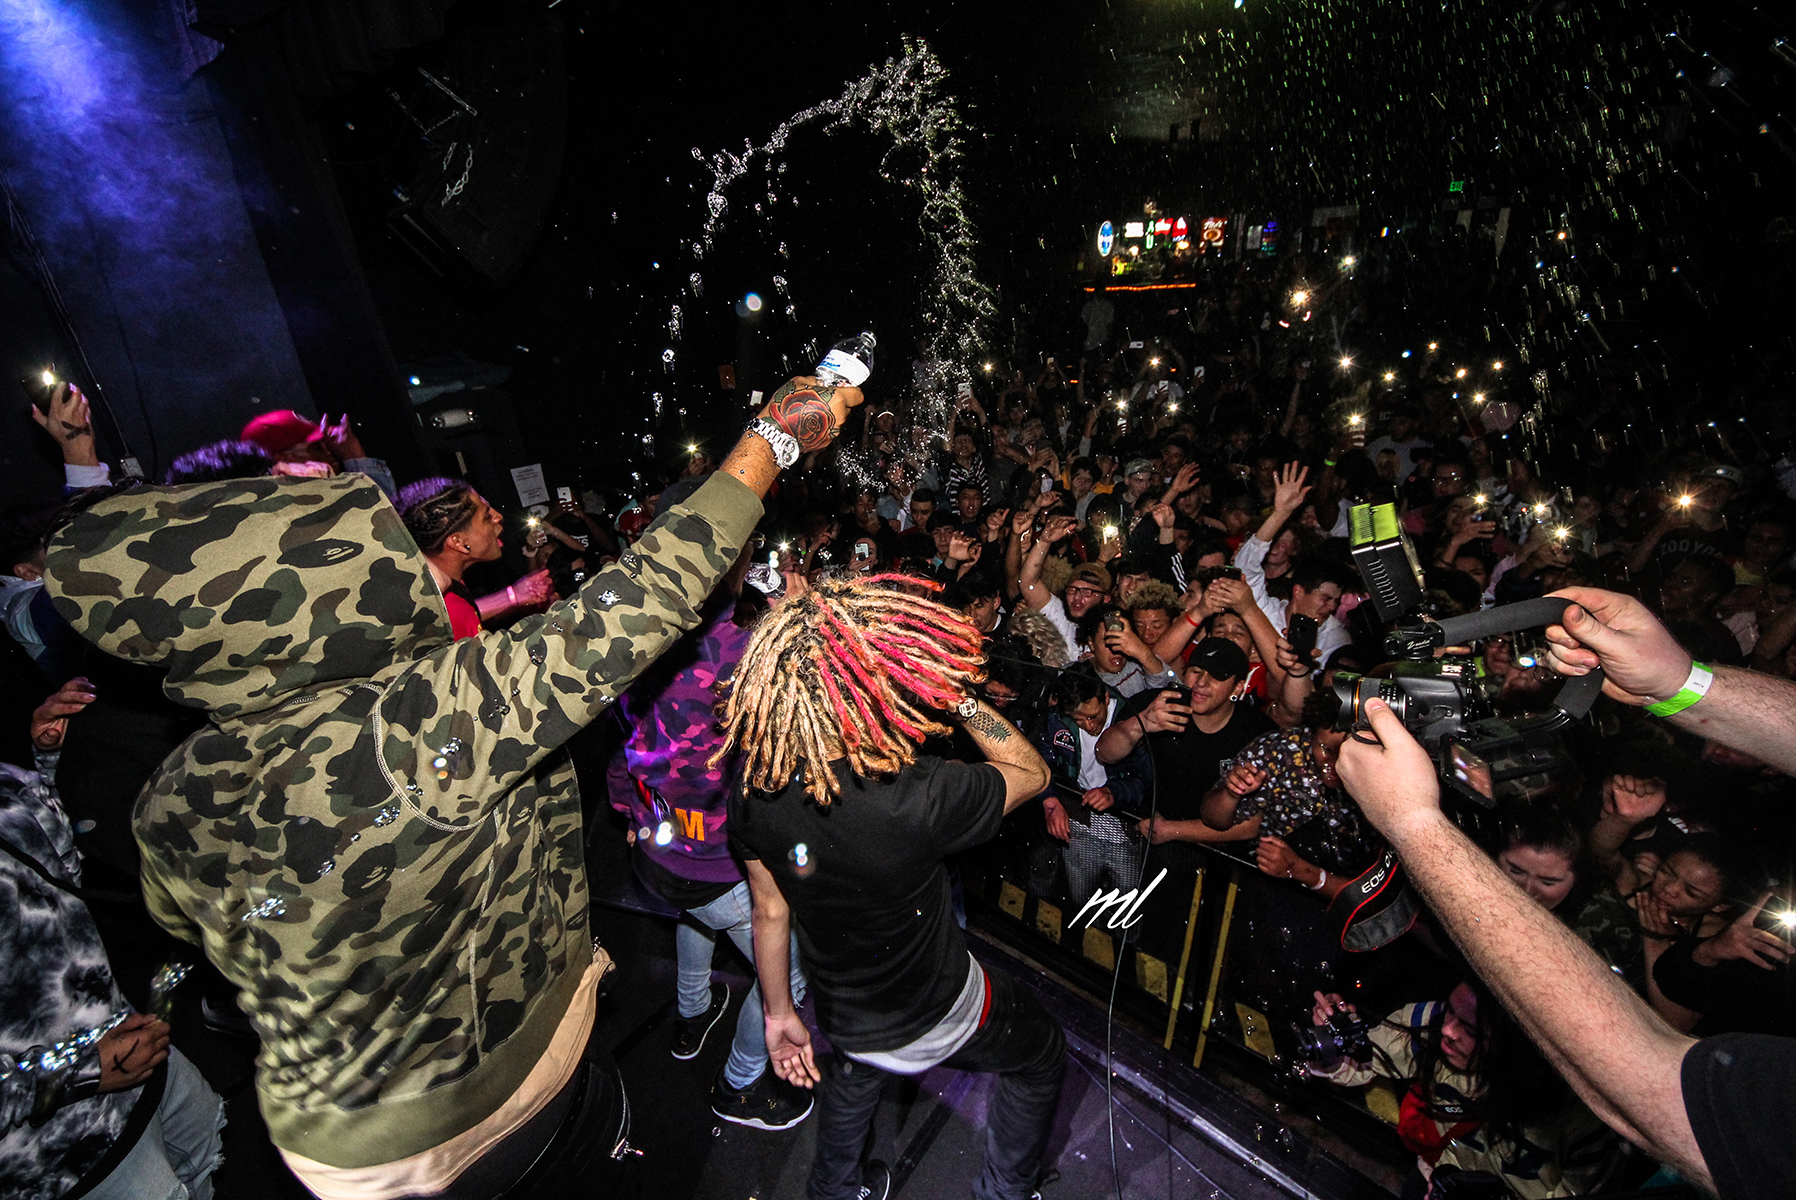 Check Out Our Recap of Lil Pump’s Sold Out Show in Denver, CO | Daily Chiefers